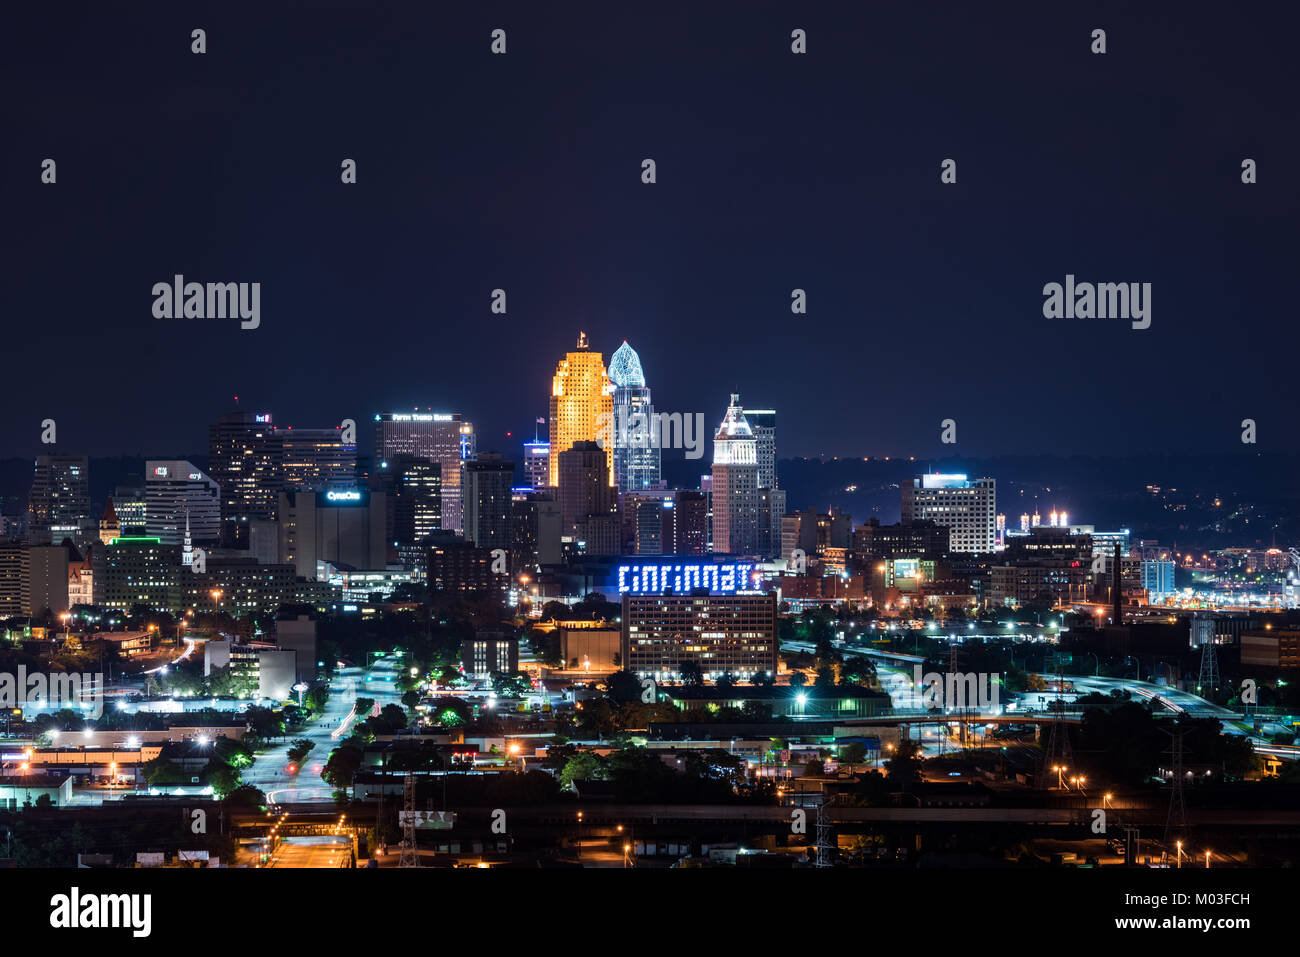 View of the City of Cincinnati from the west side Stock Photo